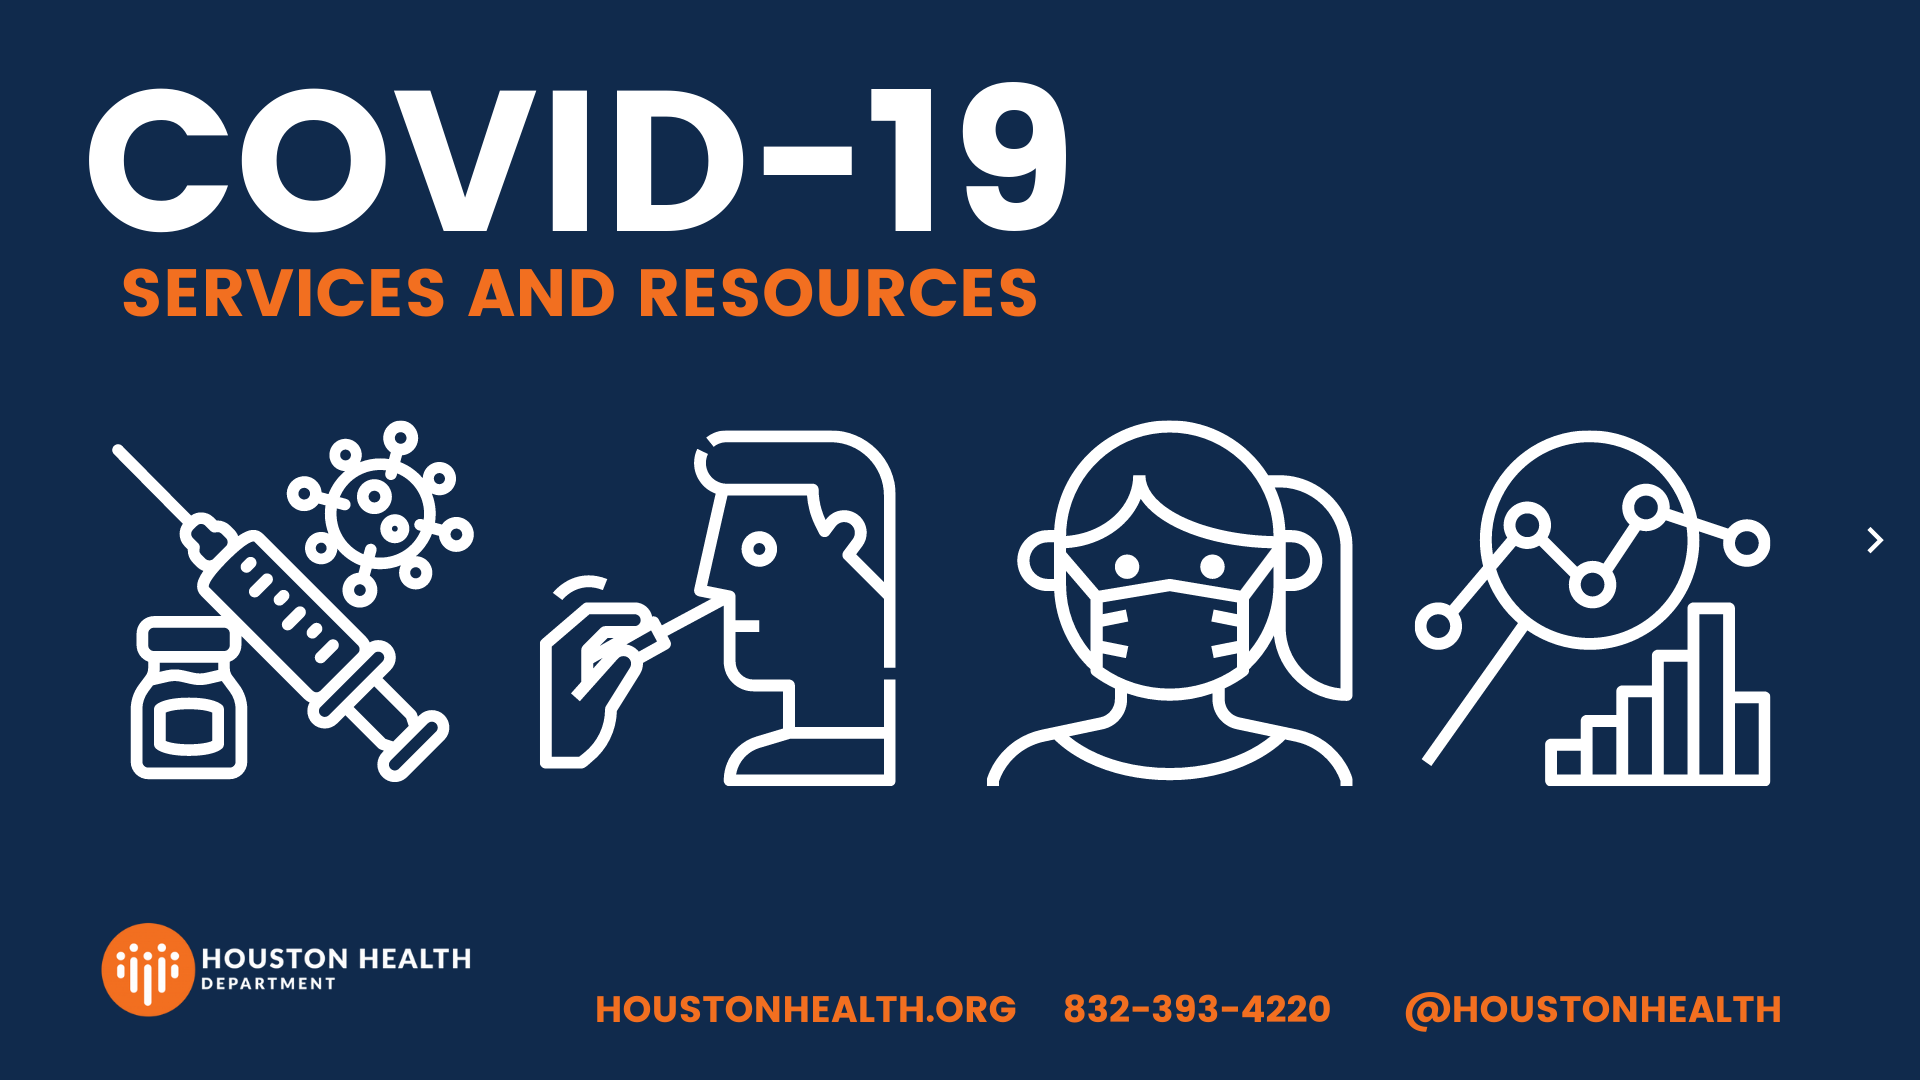 Icons showing vaccination, testing, masking, and data charts. The heading reads "Covid-19 Services and Resources." The Houston Health Department logo is on the bottom left.